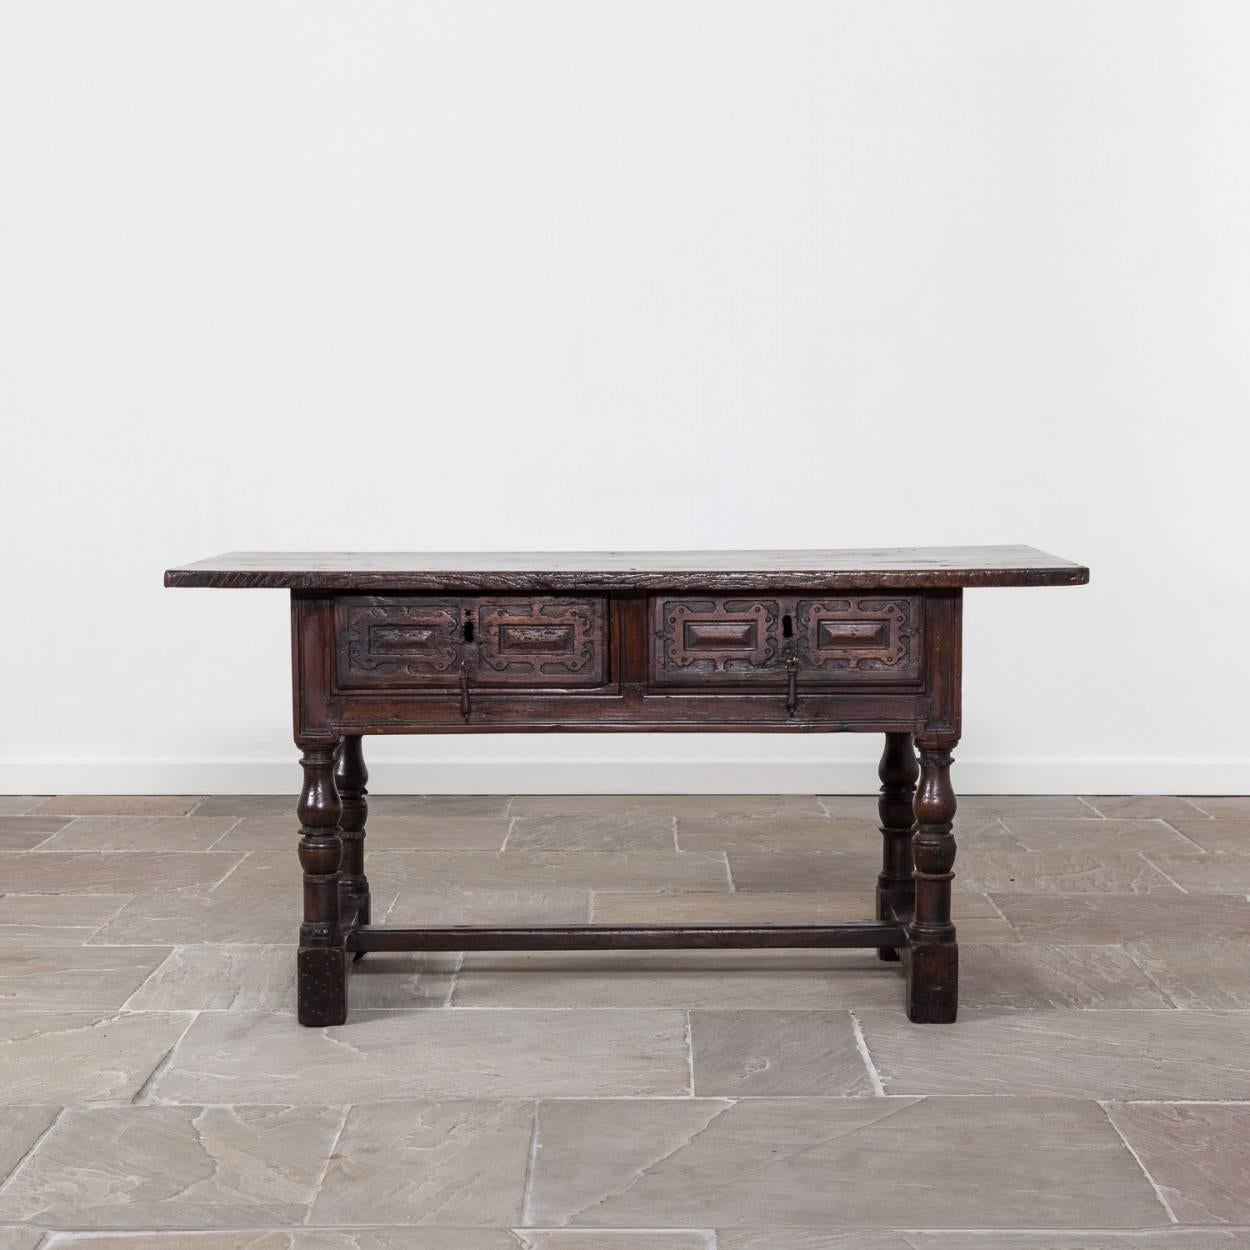 Very handsome and good looking 17th century Spanish serving table. It is a walnut table with chestnut top. 

This is a lovely original table, the only alteration being its stretcher which appears to be a historic replacement.